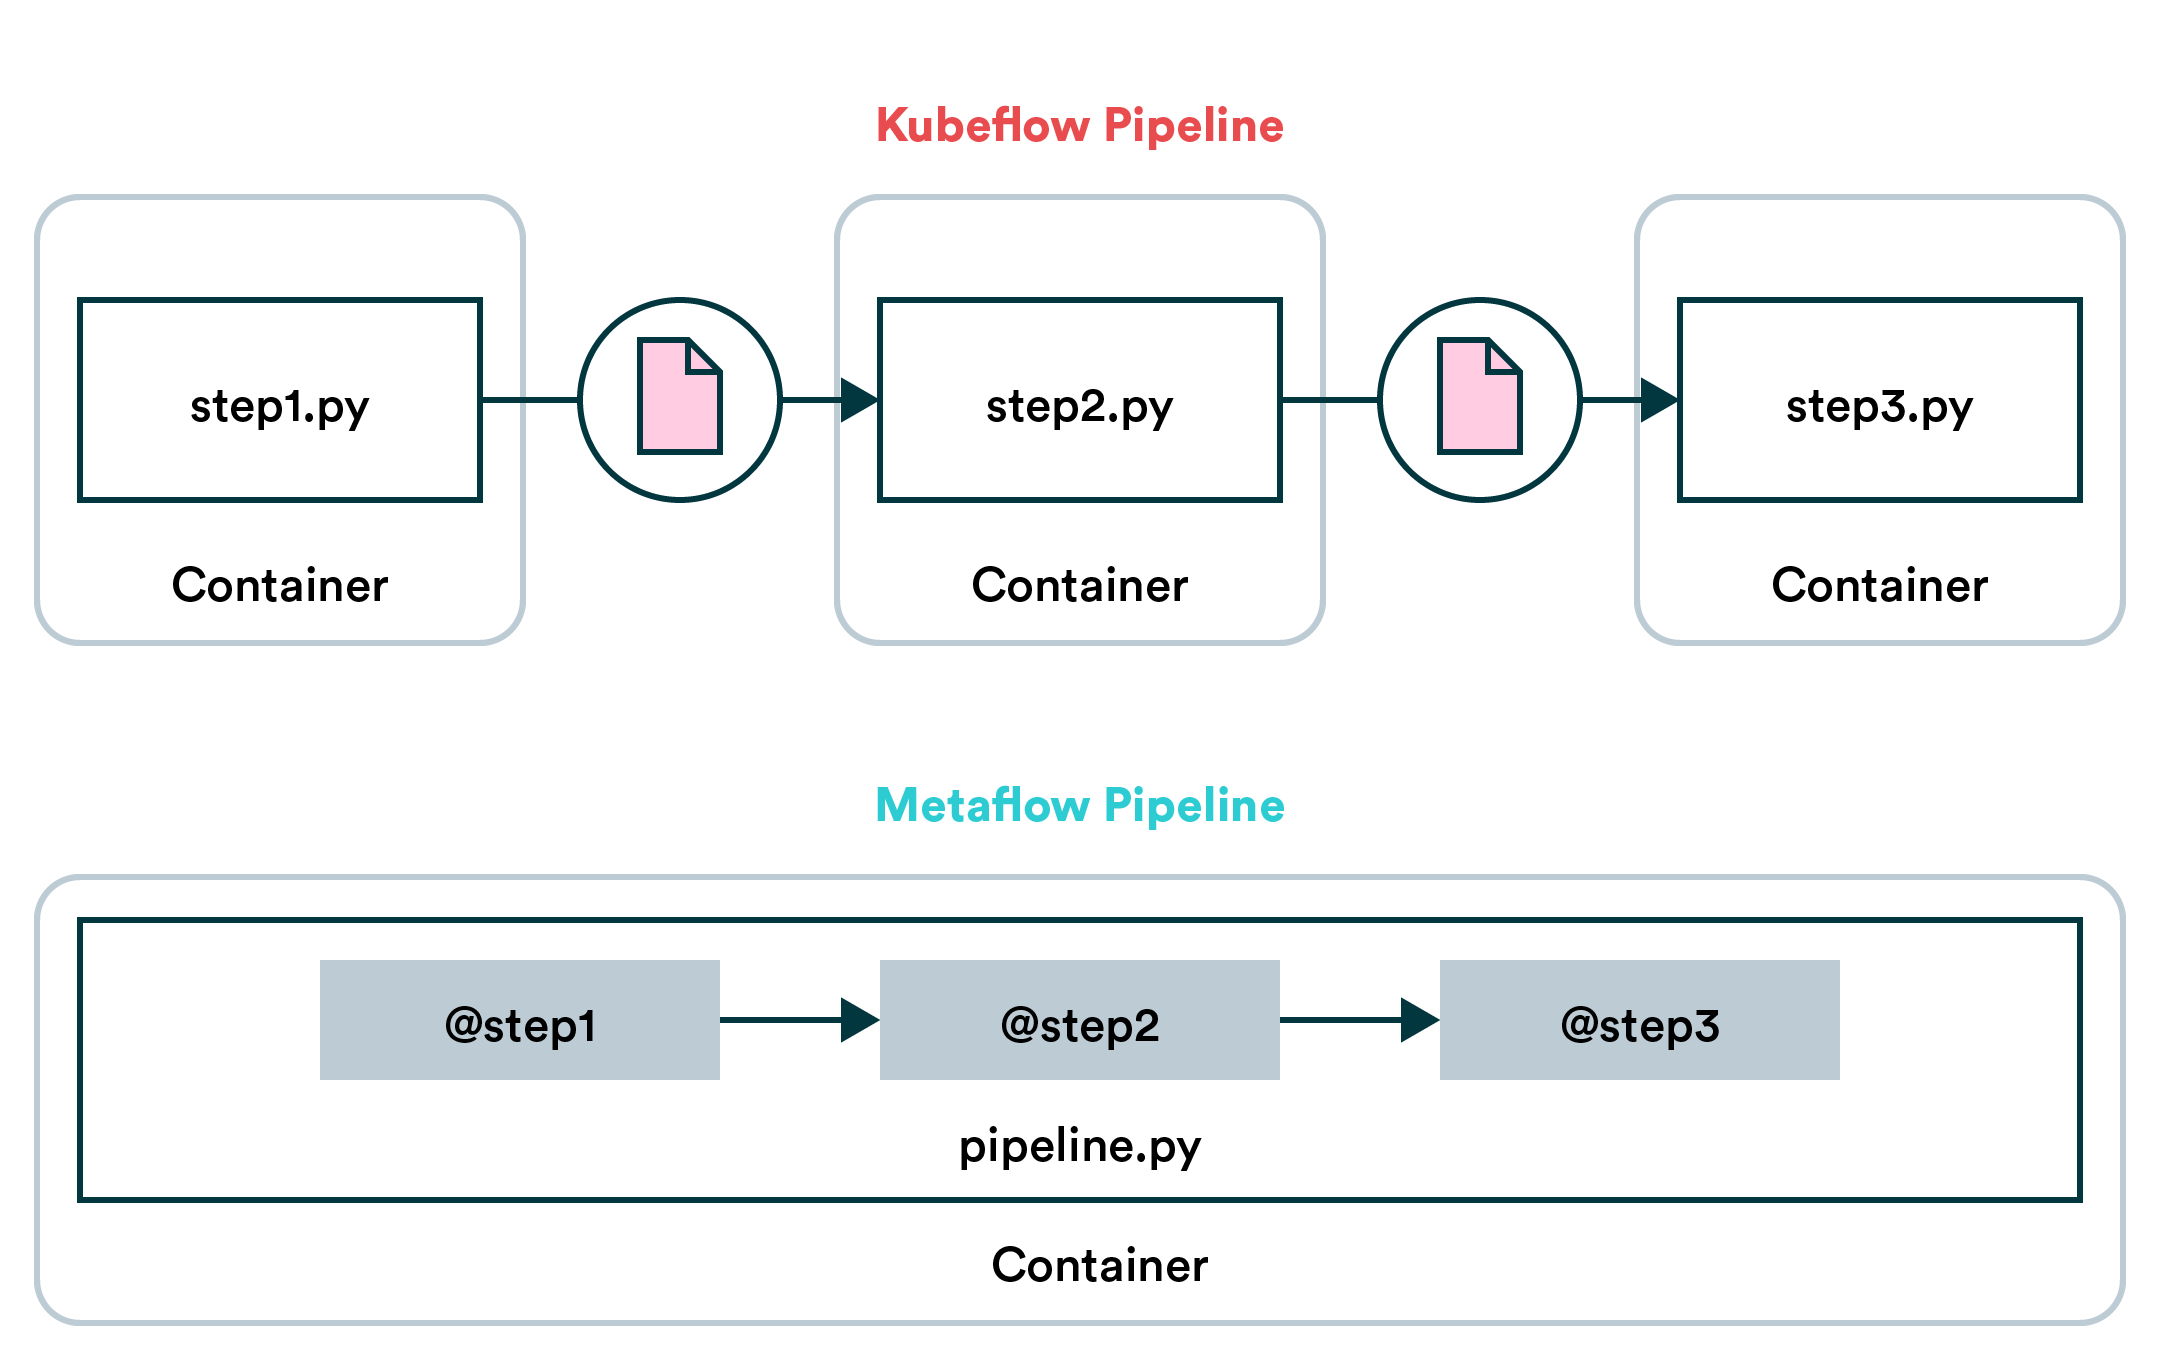 Metaflow and Kubeflow platform approach compared